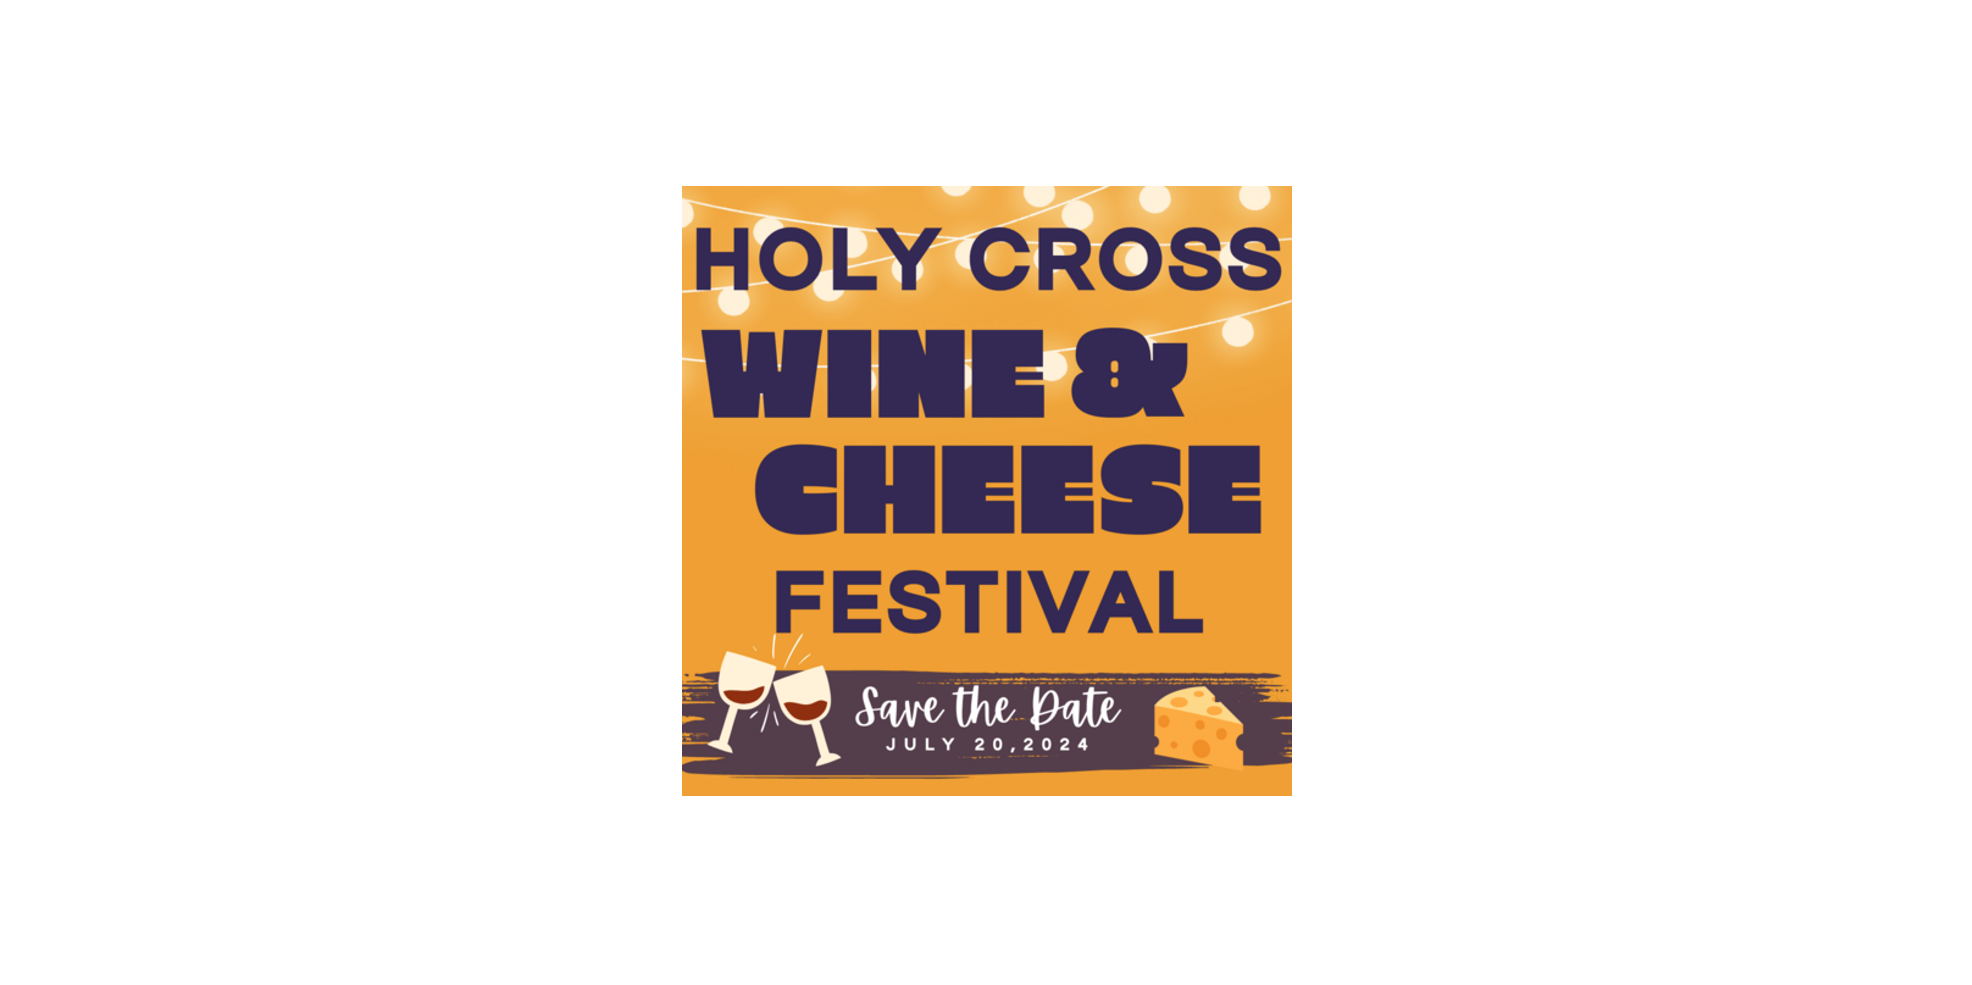 Holy Cross Wine & Cheese Festival promotional image